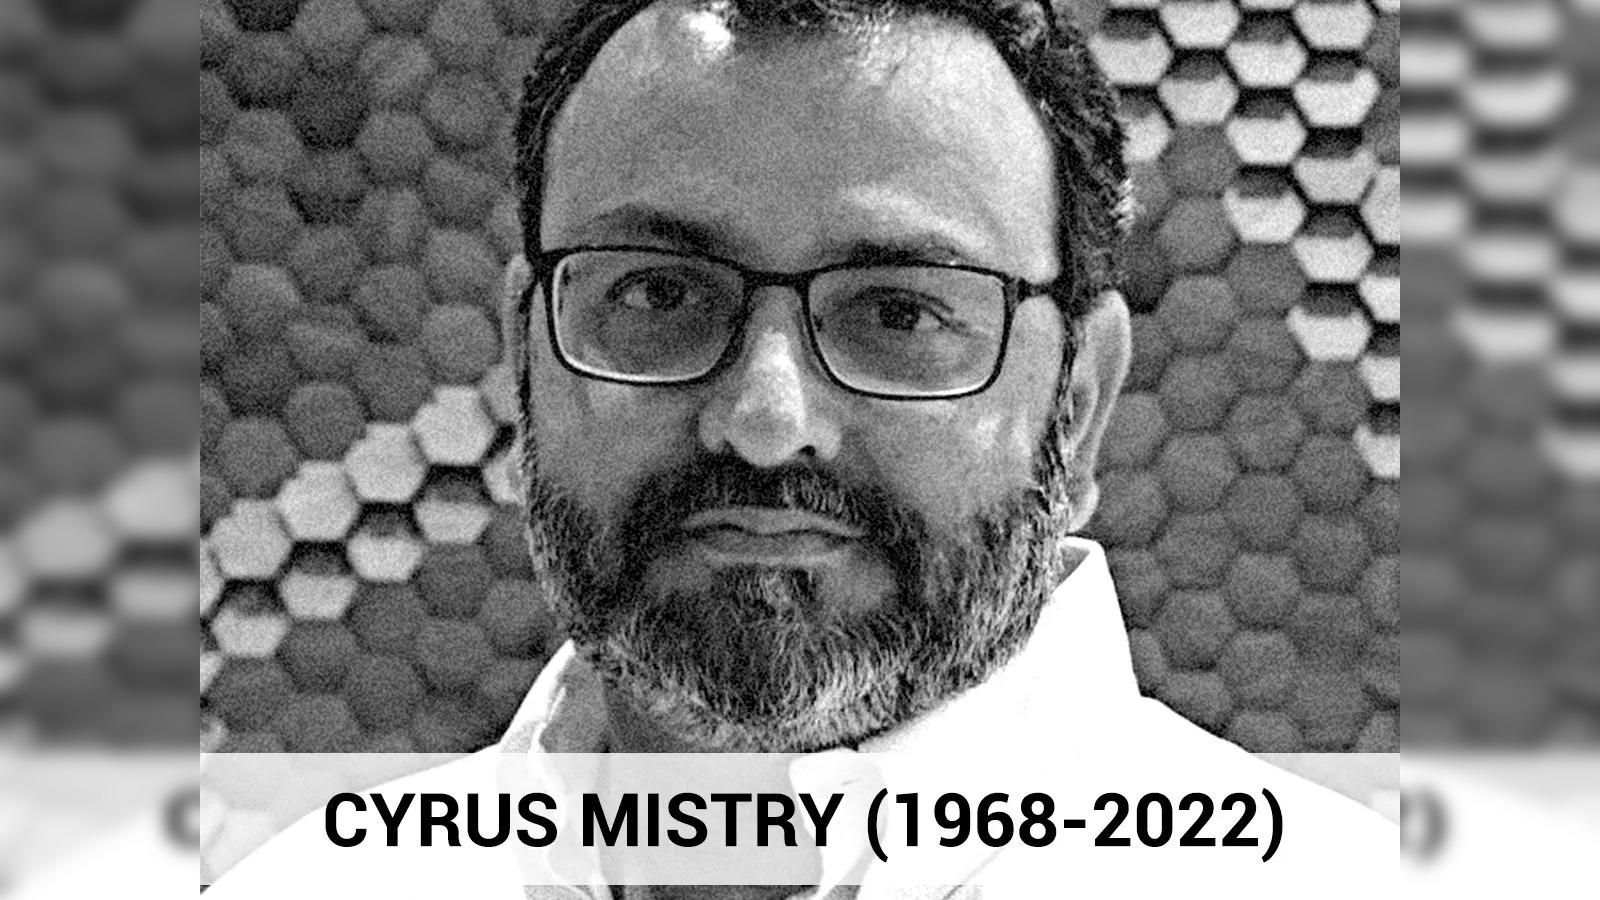 Cyrus Mistry Car Crash: Separating fact from speculation